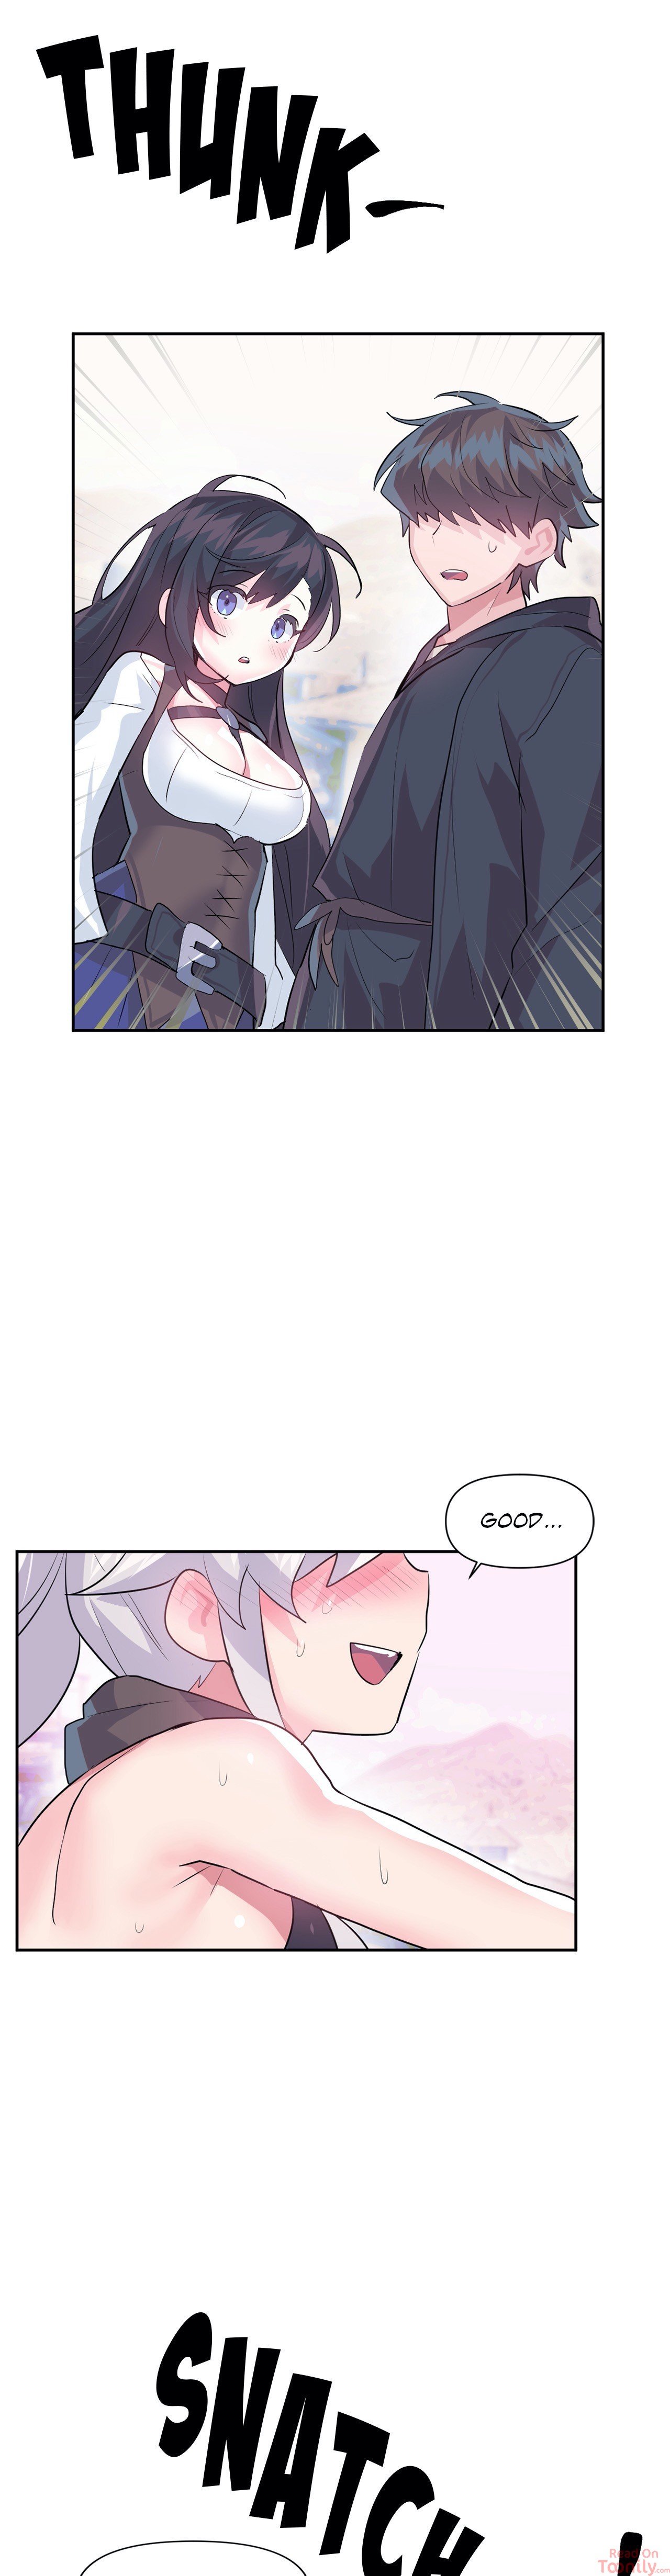 log-in-to-lust-a-land-chap-32-24